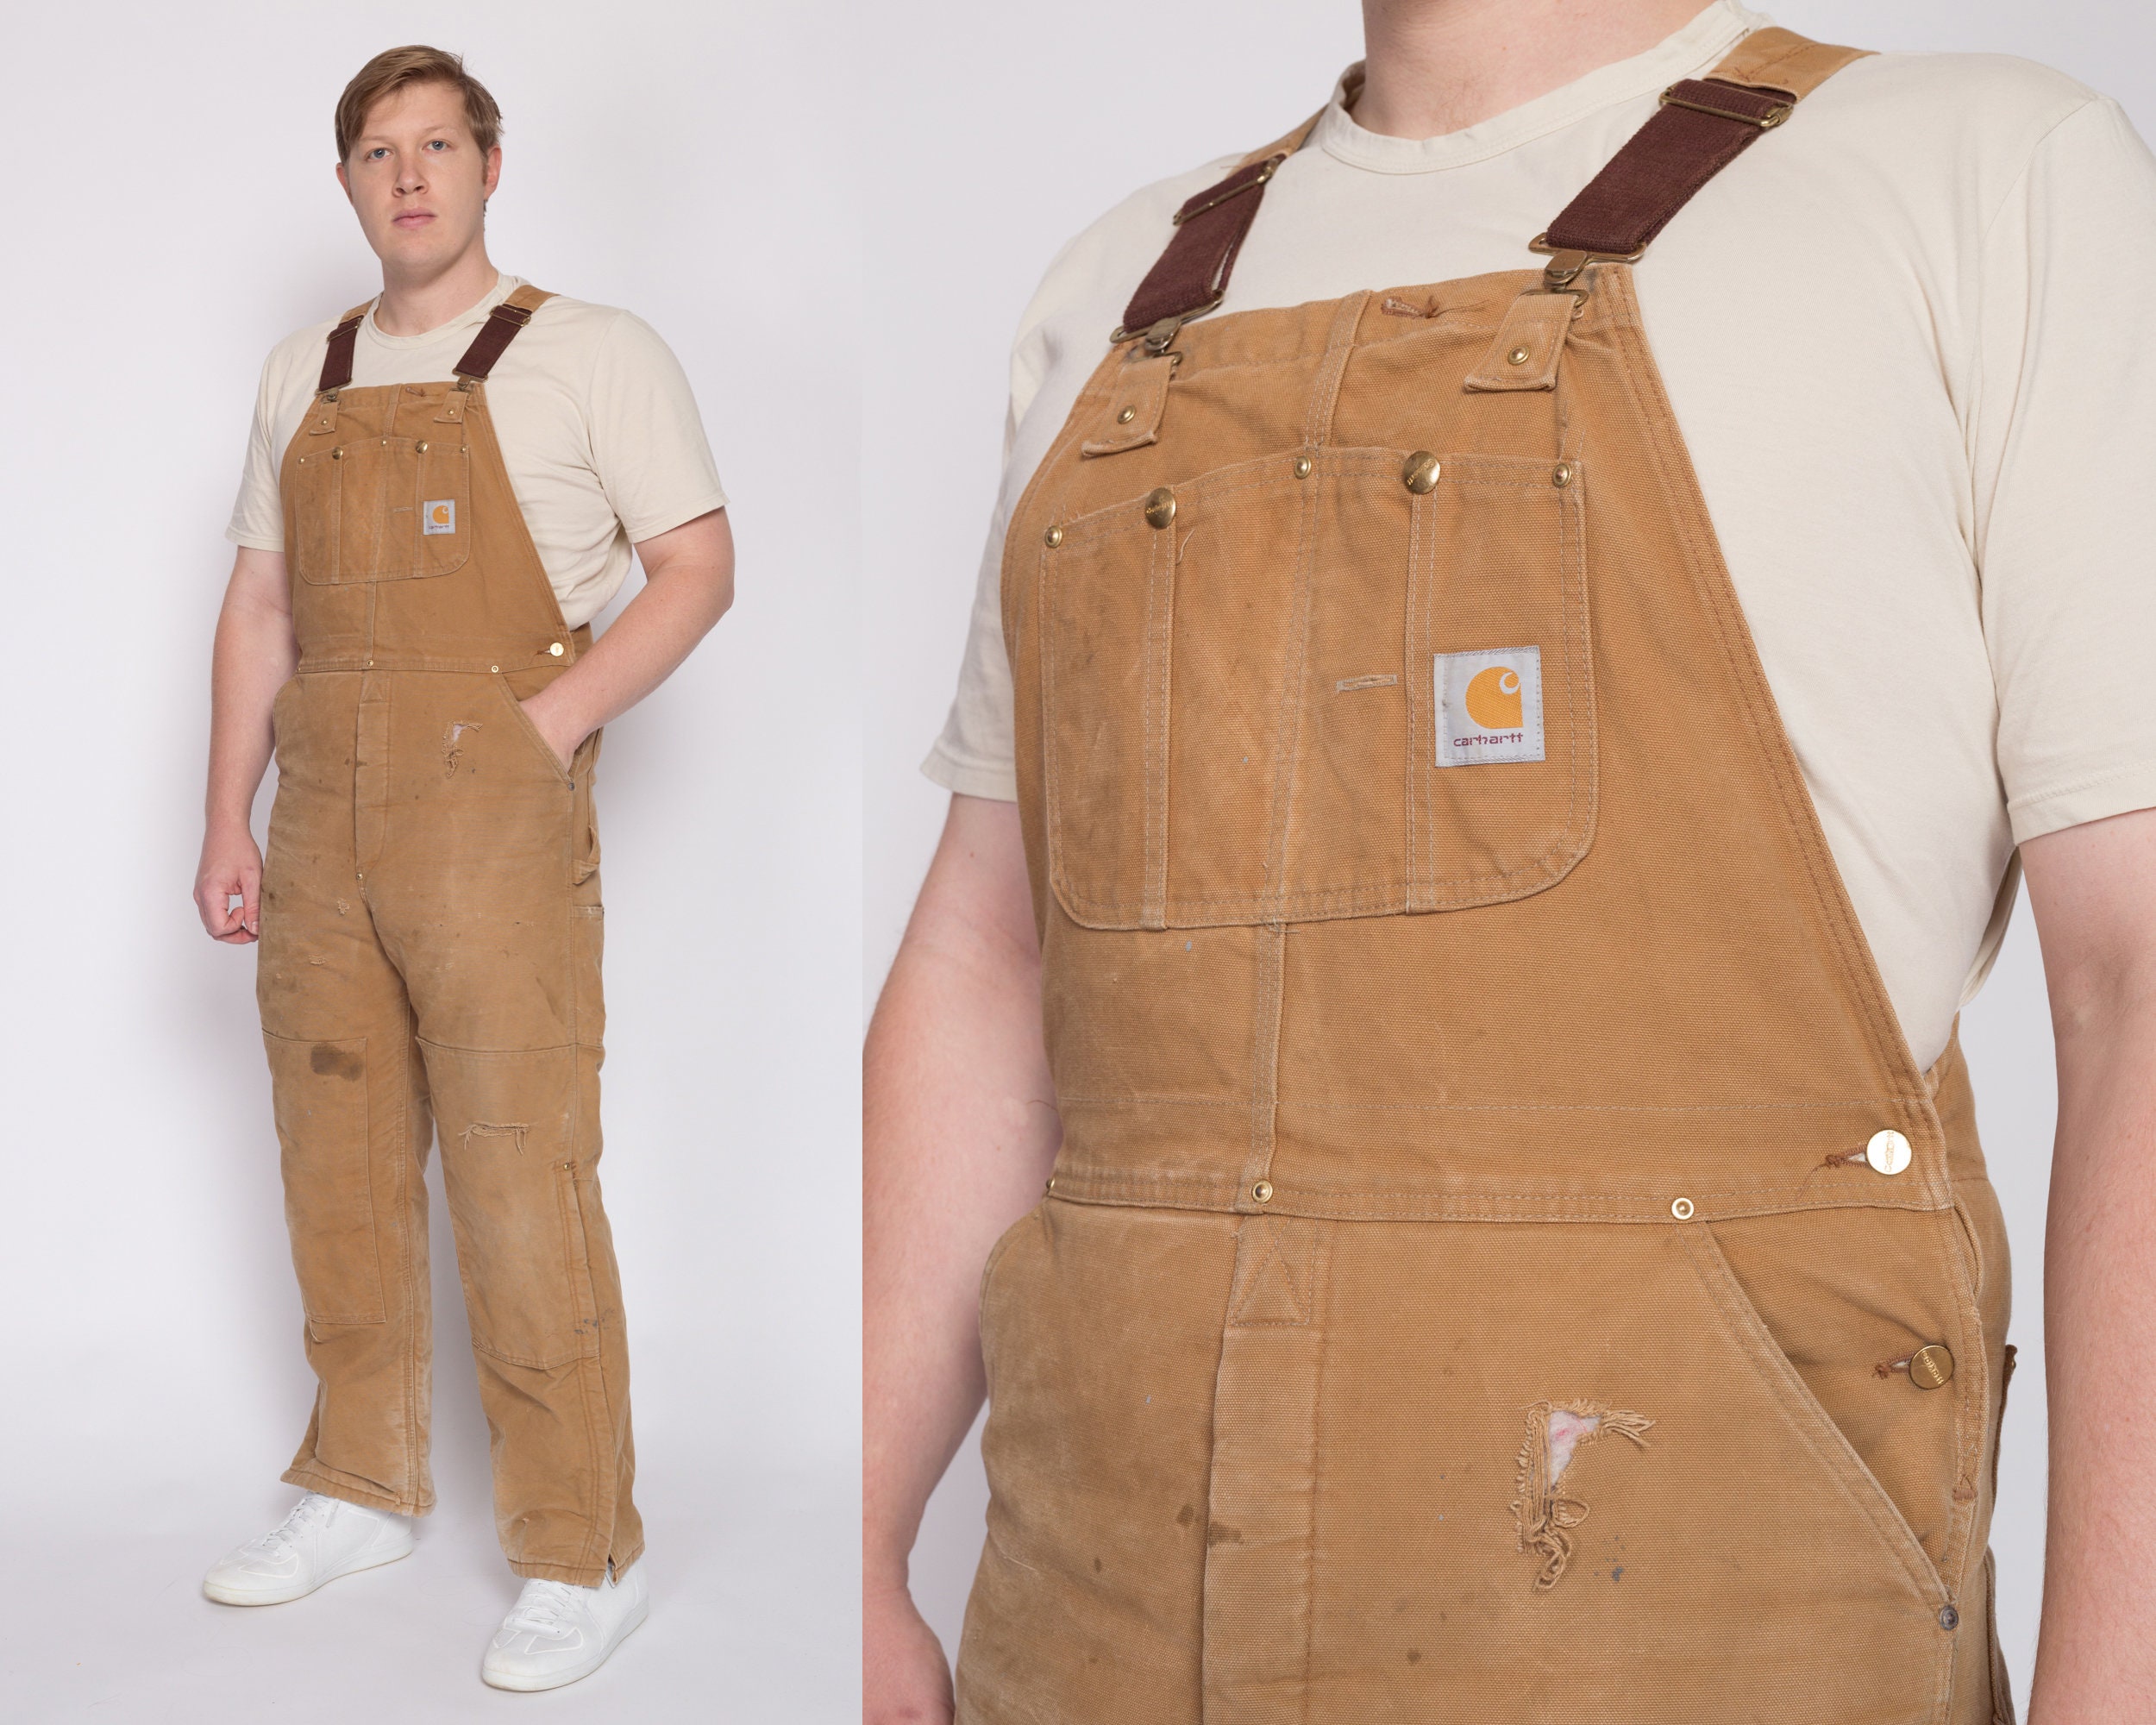 Carhartt Duck Quilt-Lined Zip-To-Thigh Bib Overalls - Apparel to Gifts  Embroidery Carhartt Duck Quilt-Lined Zip-To-Thigh Bib Overalls